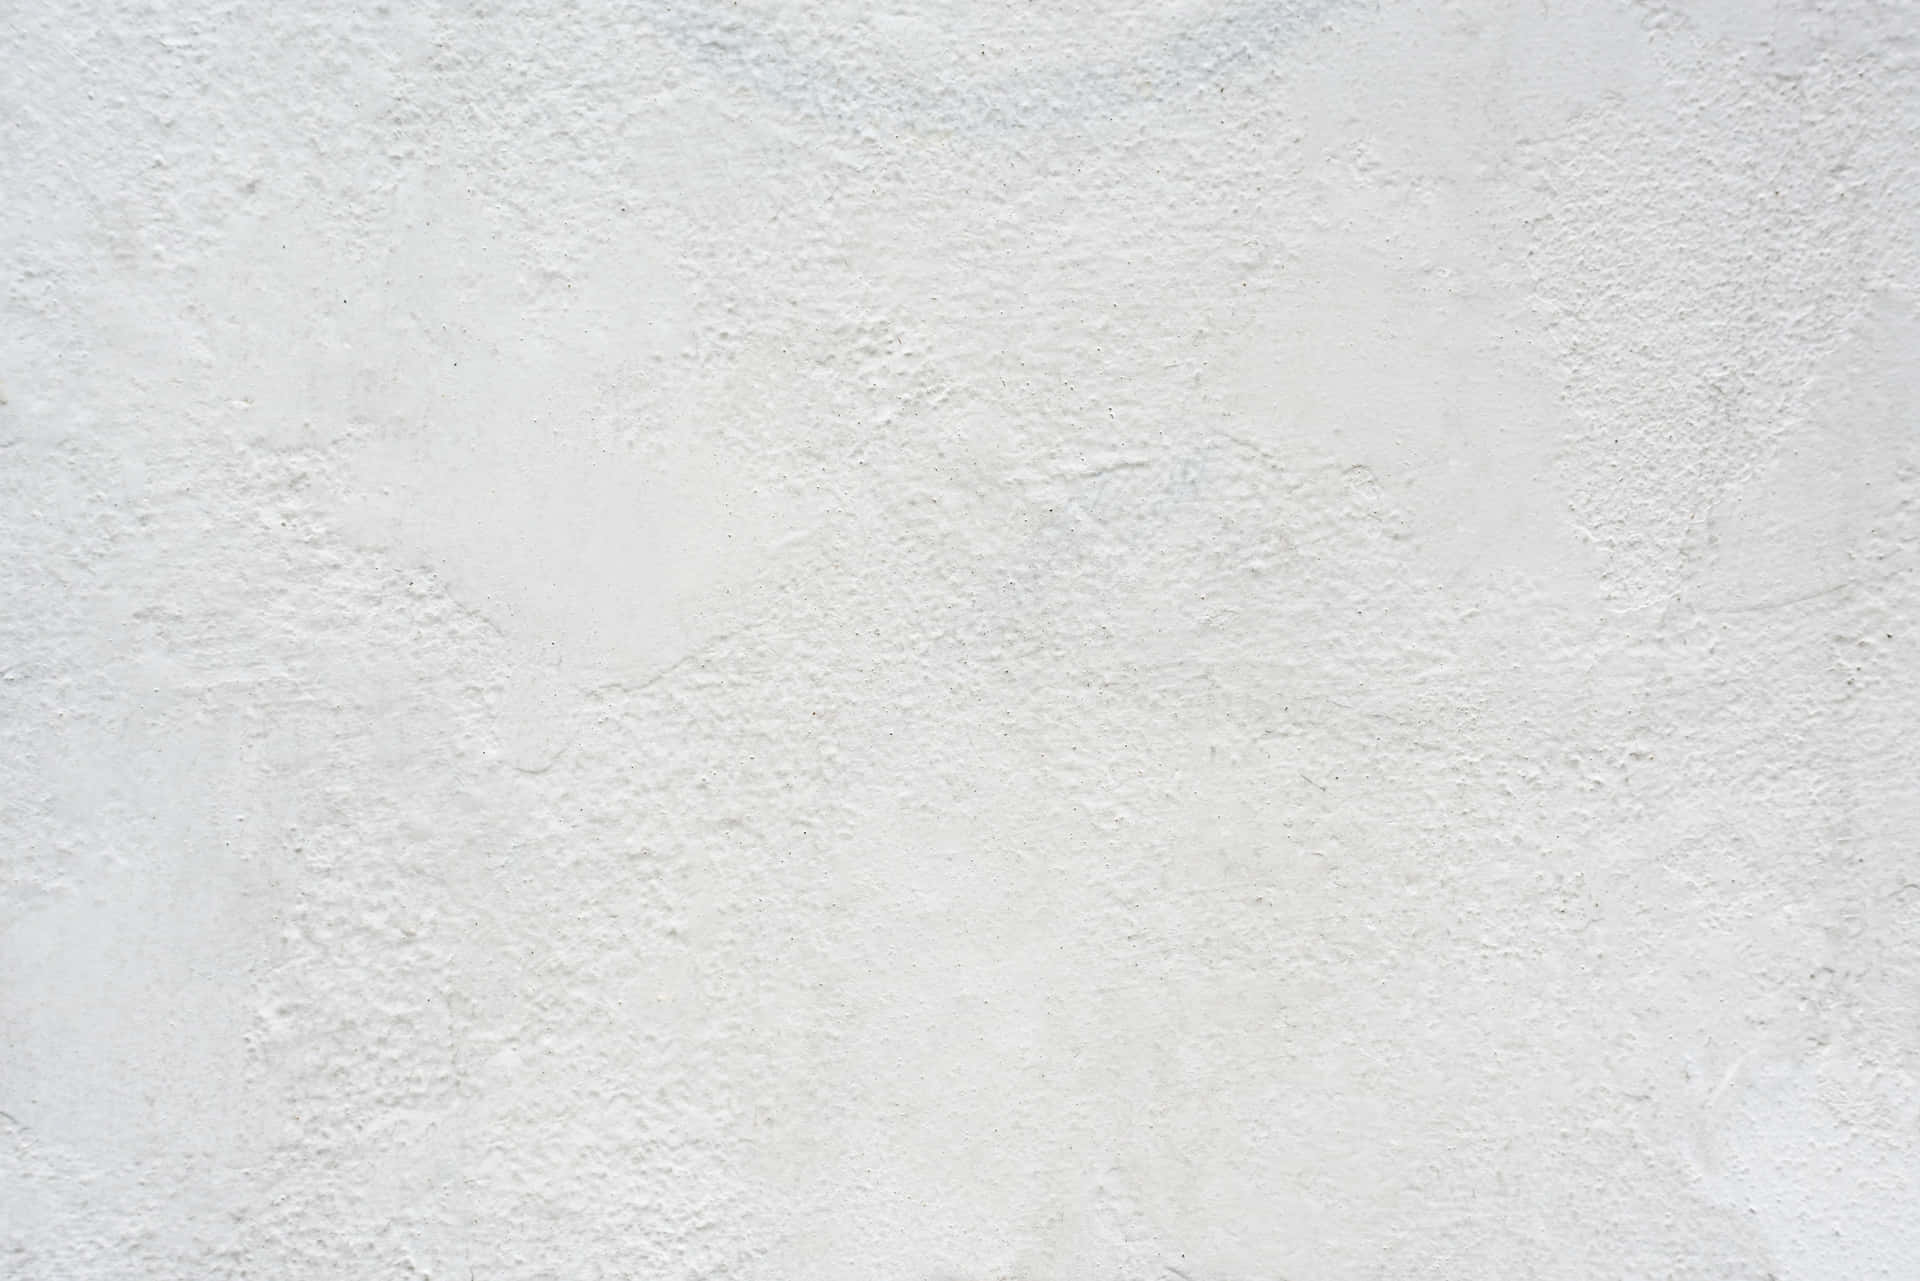 White Wall Background With Feint Rough Textures